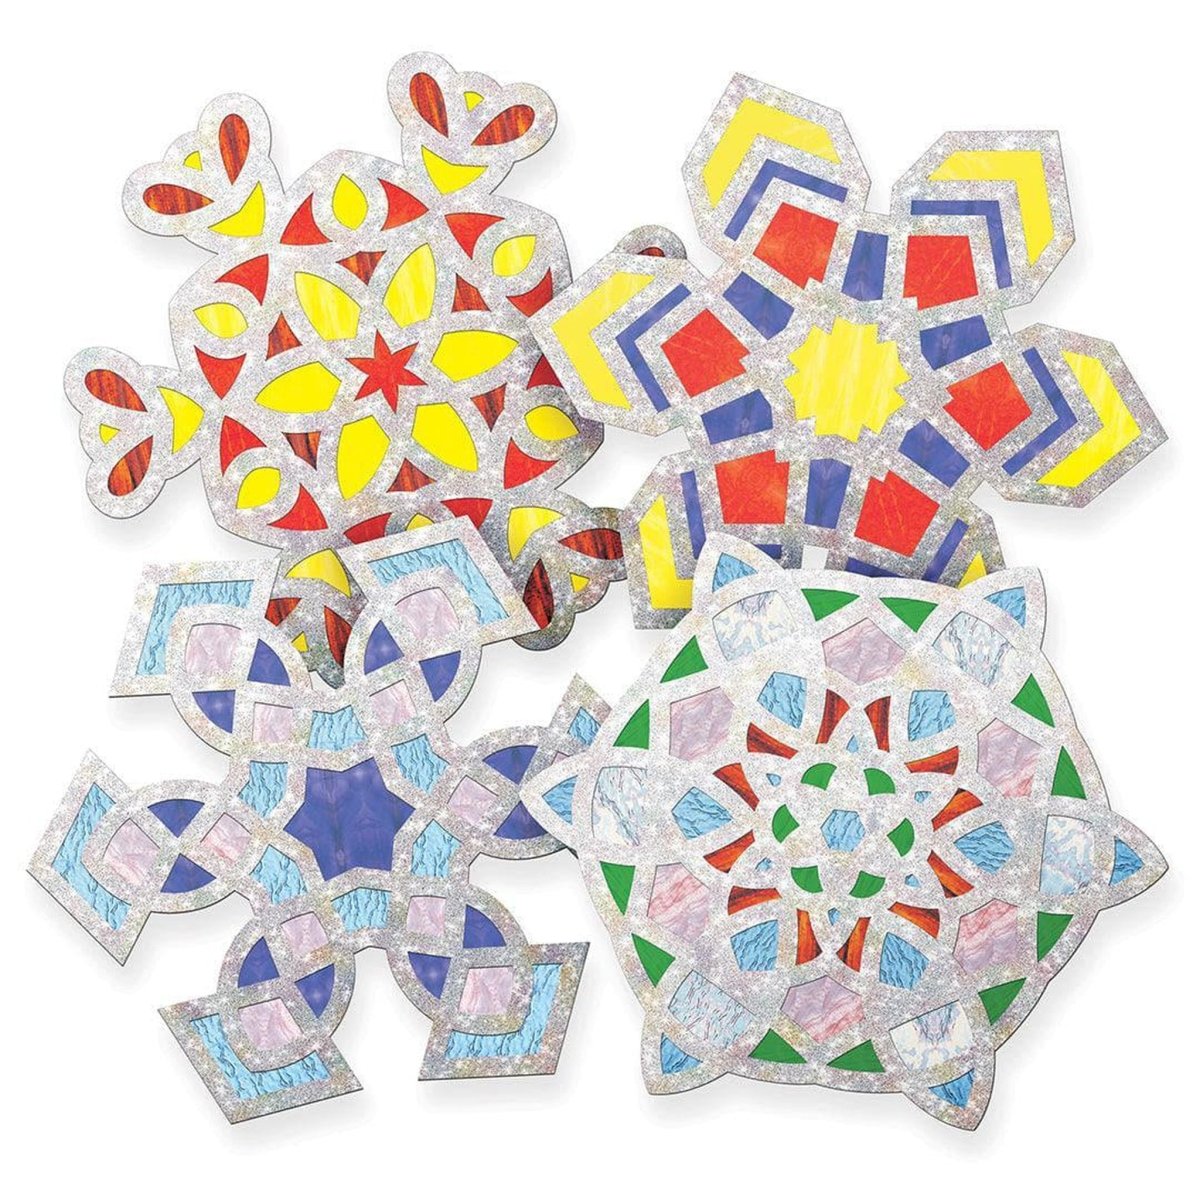 24 Pack Snowflake Stained Glass Frames - Kids Party Craft